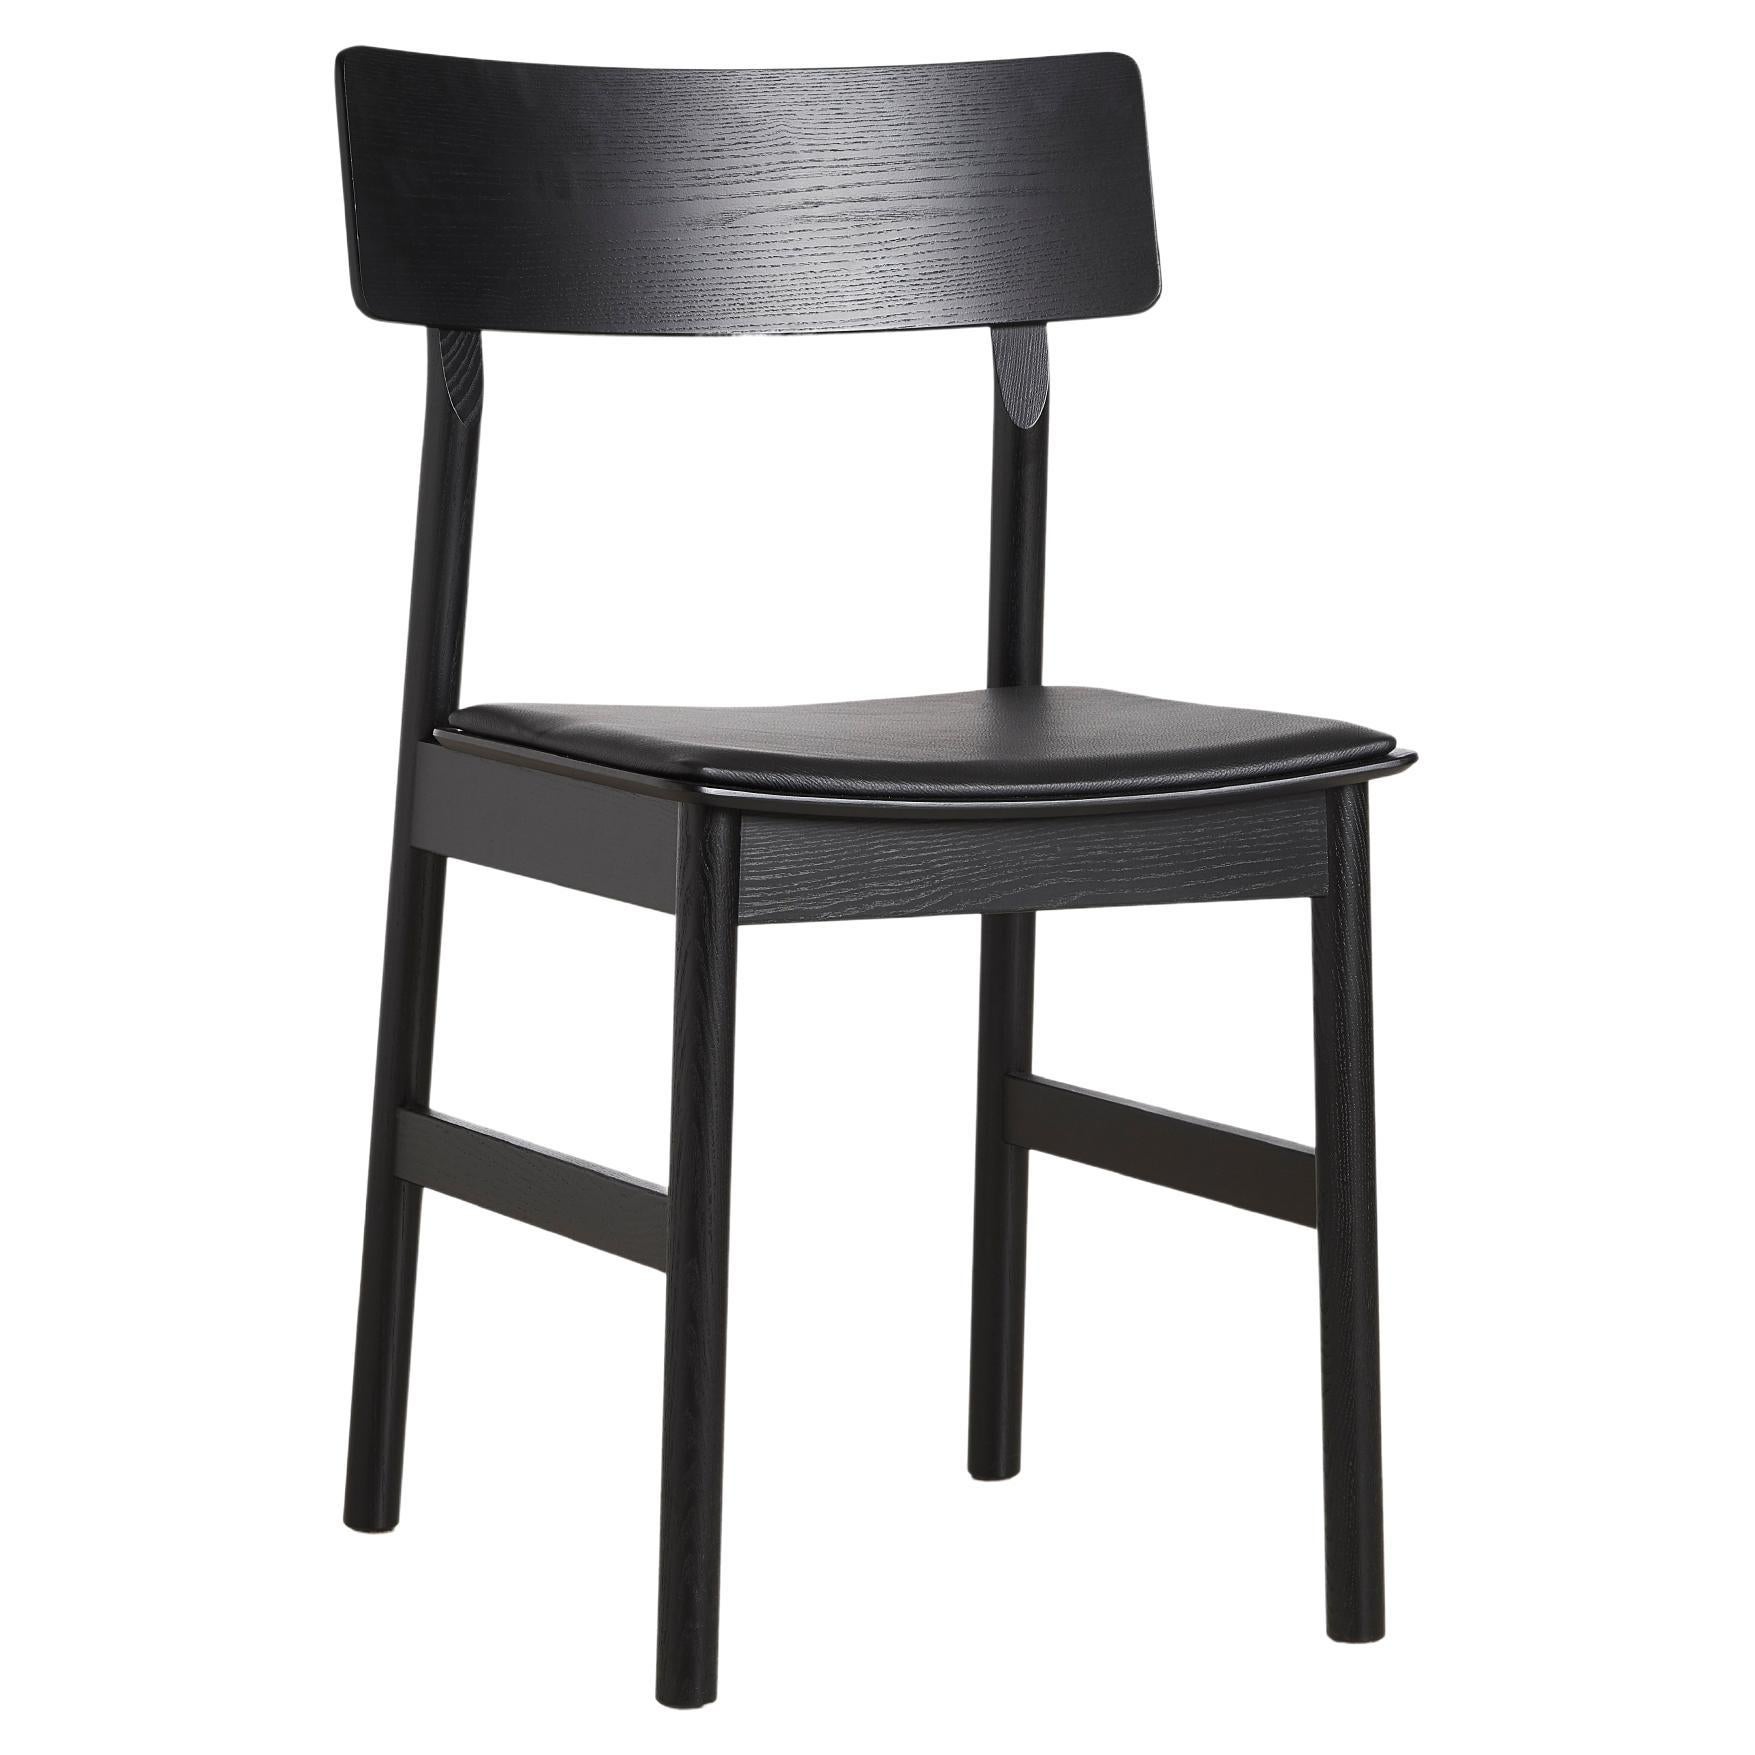 Pause Black Dining Chair 2.0 with Leather Seat by Kasper Nyman For Sale